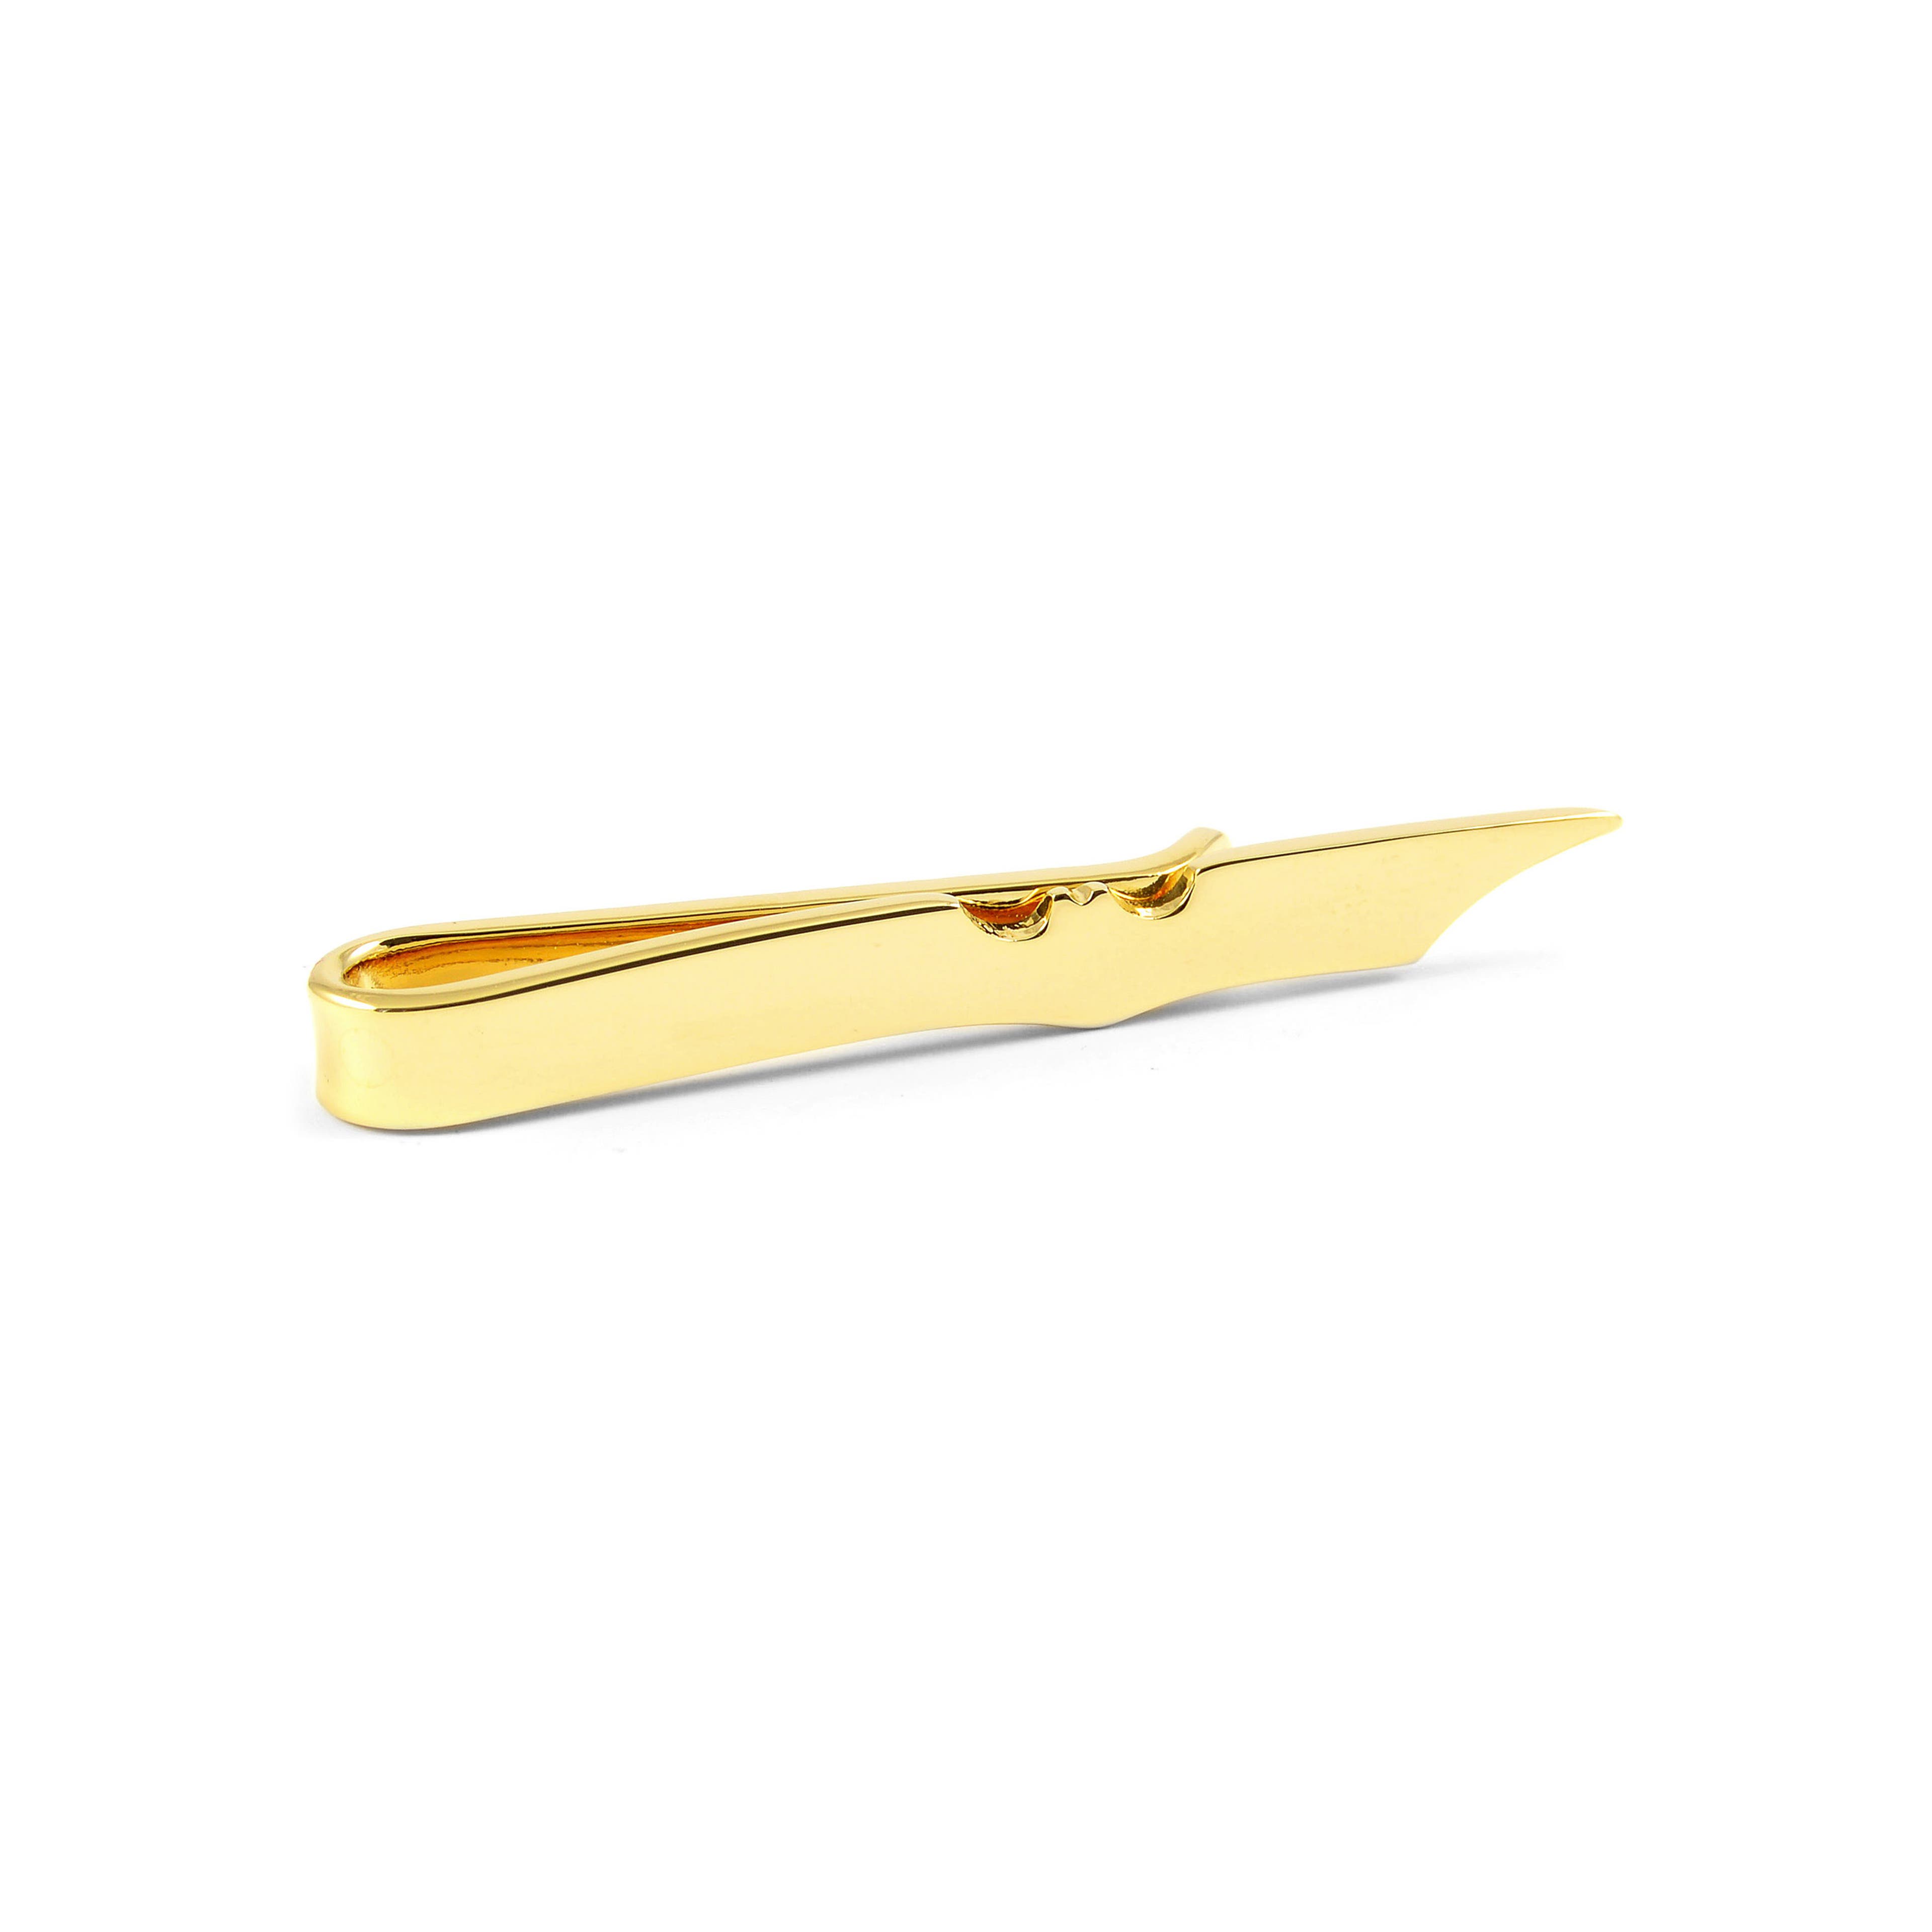 Gold-Tone Wing Tie Bar